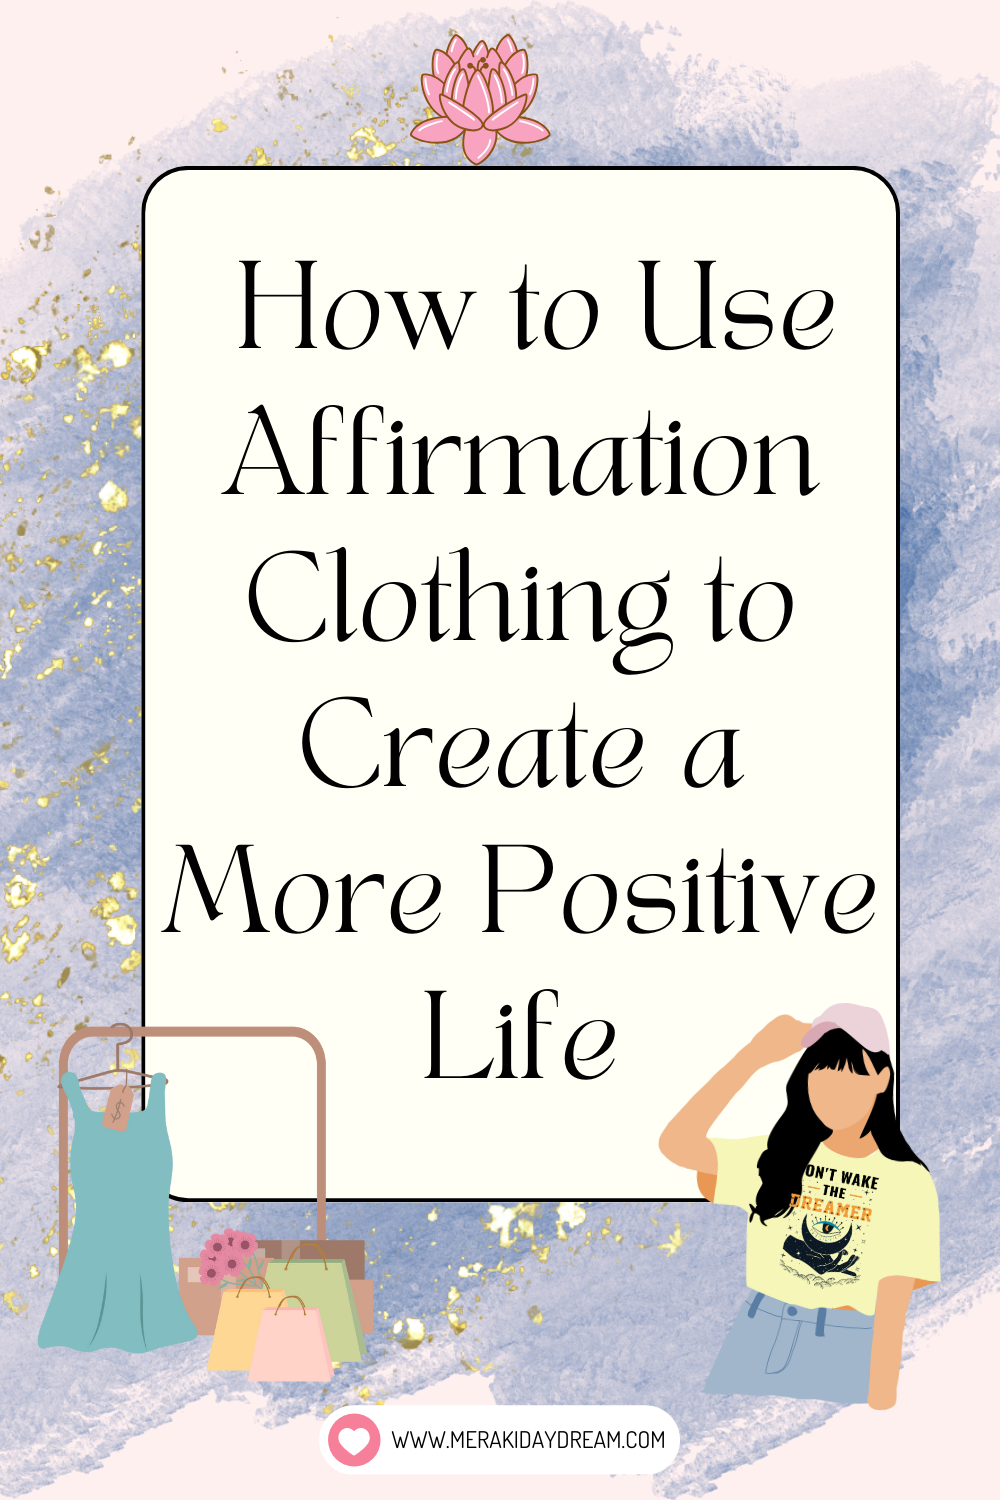 How to Use Affirmation Clothing to Create a More Positive Life